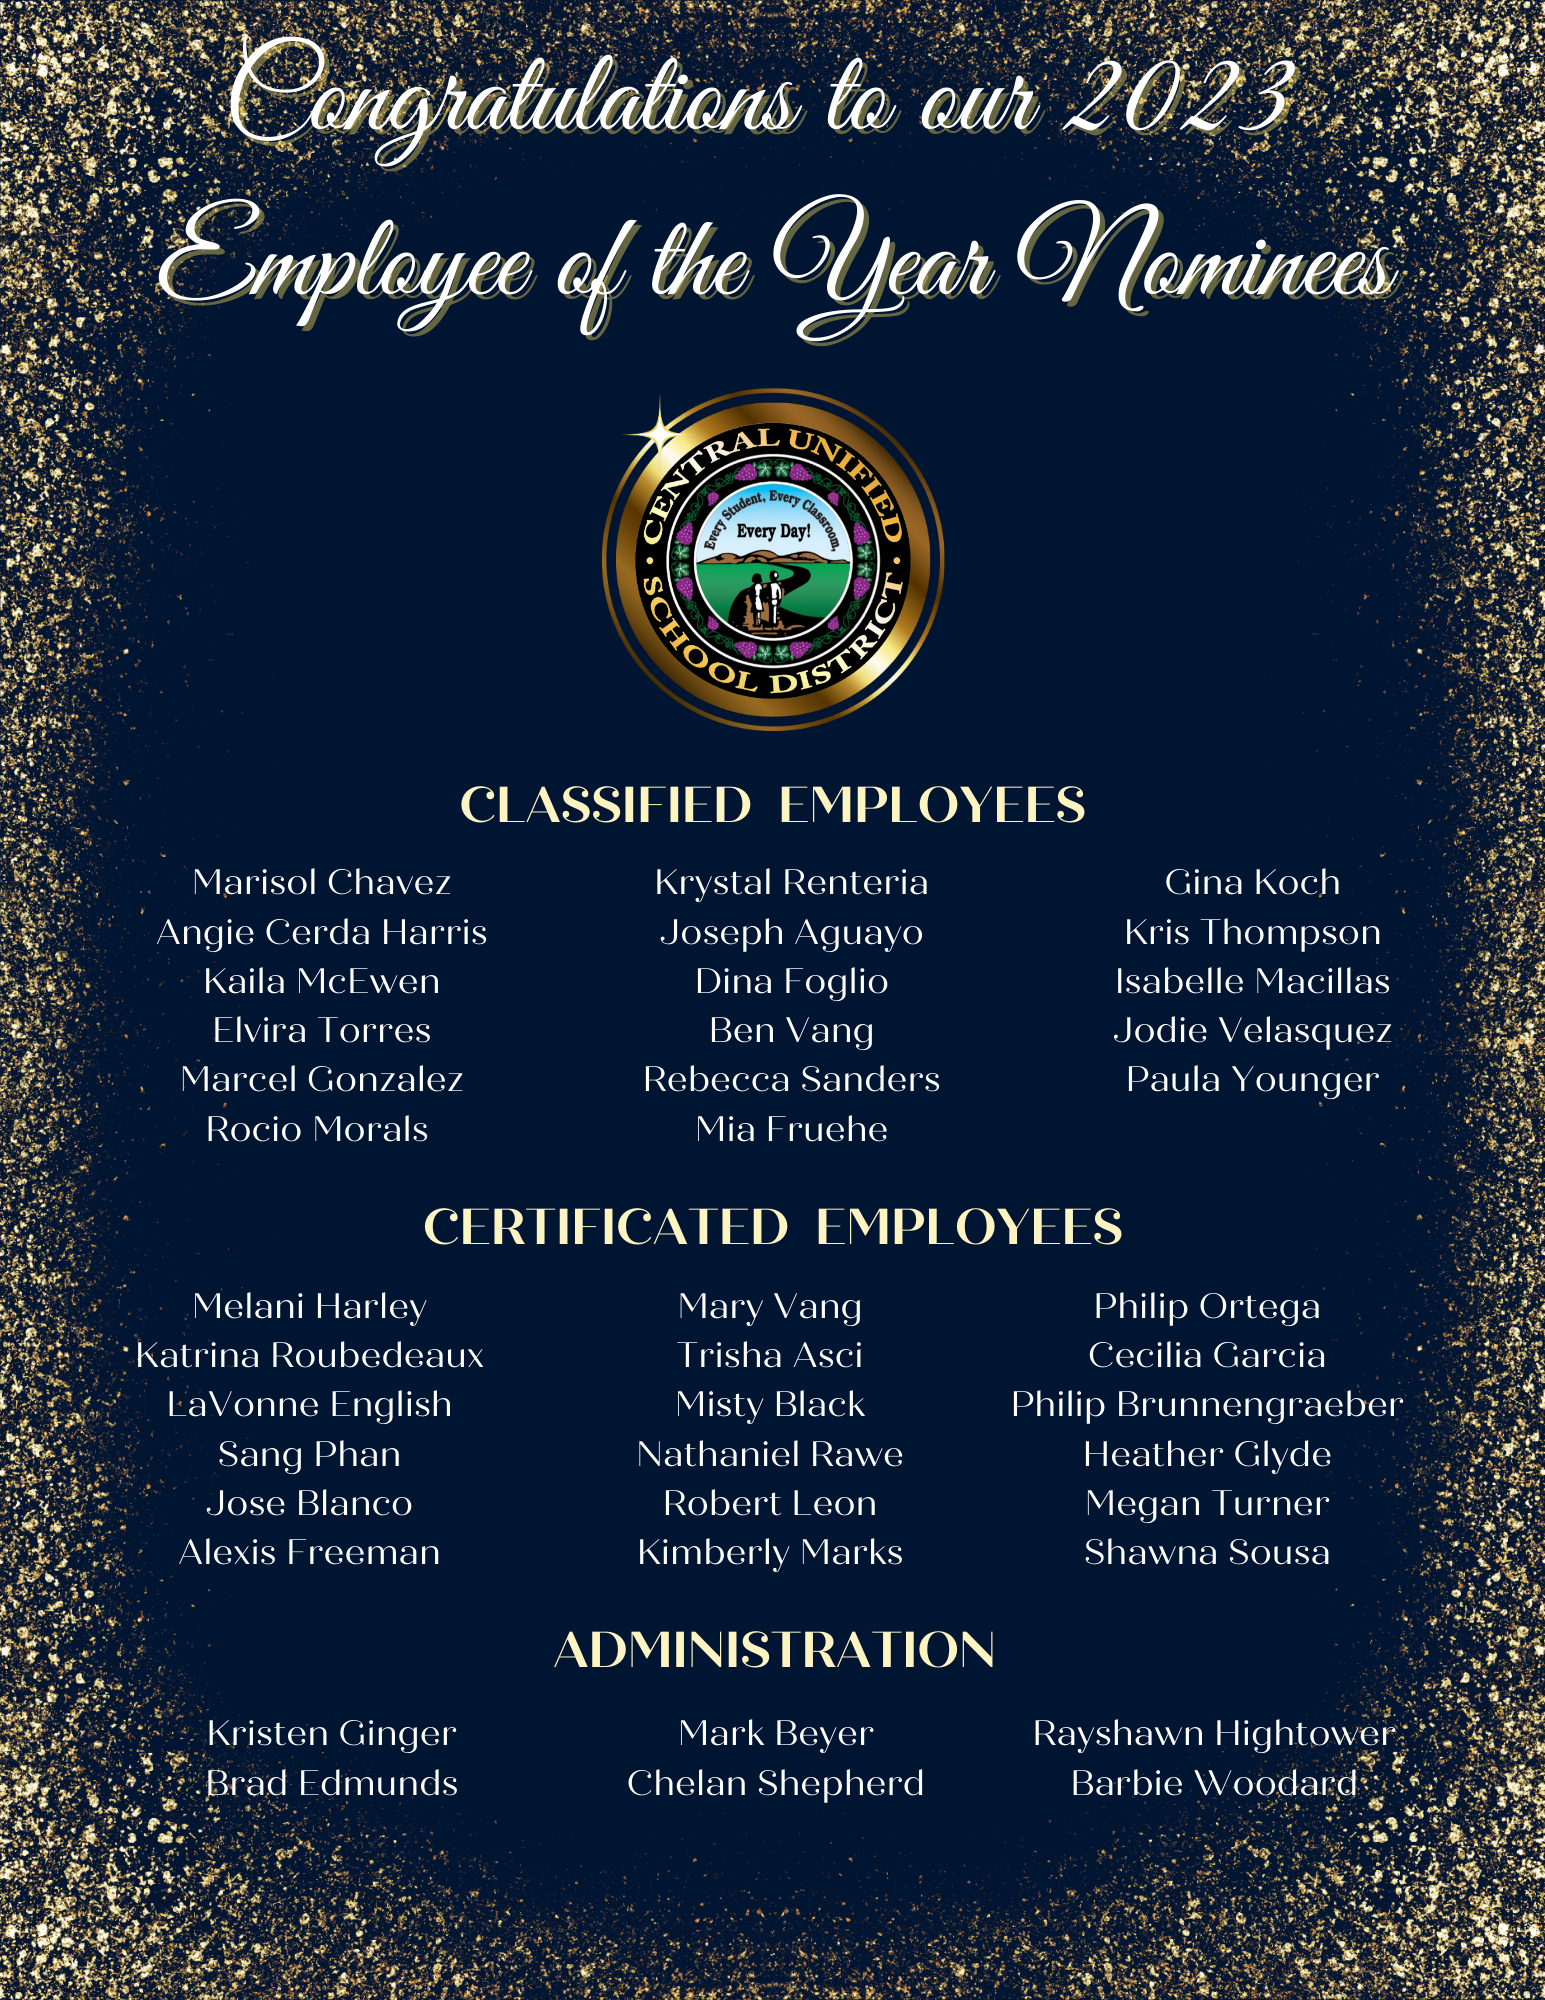 Employee of the Year nominees list